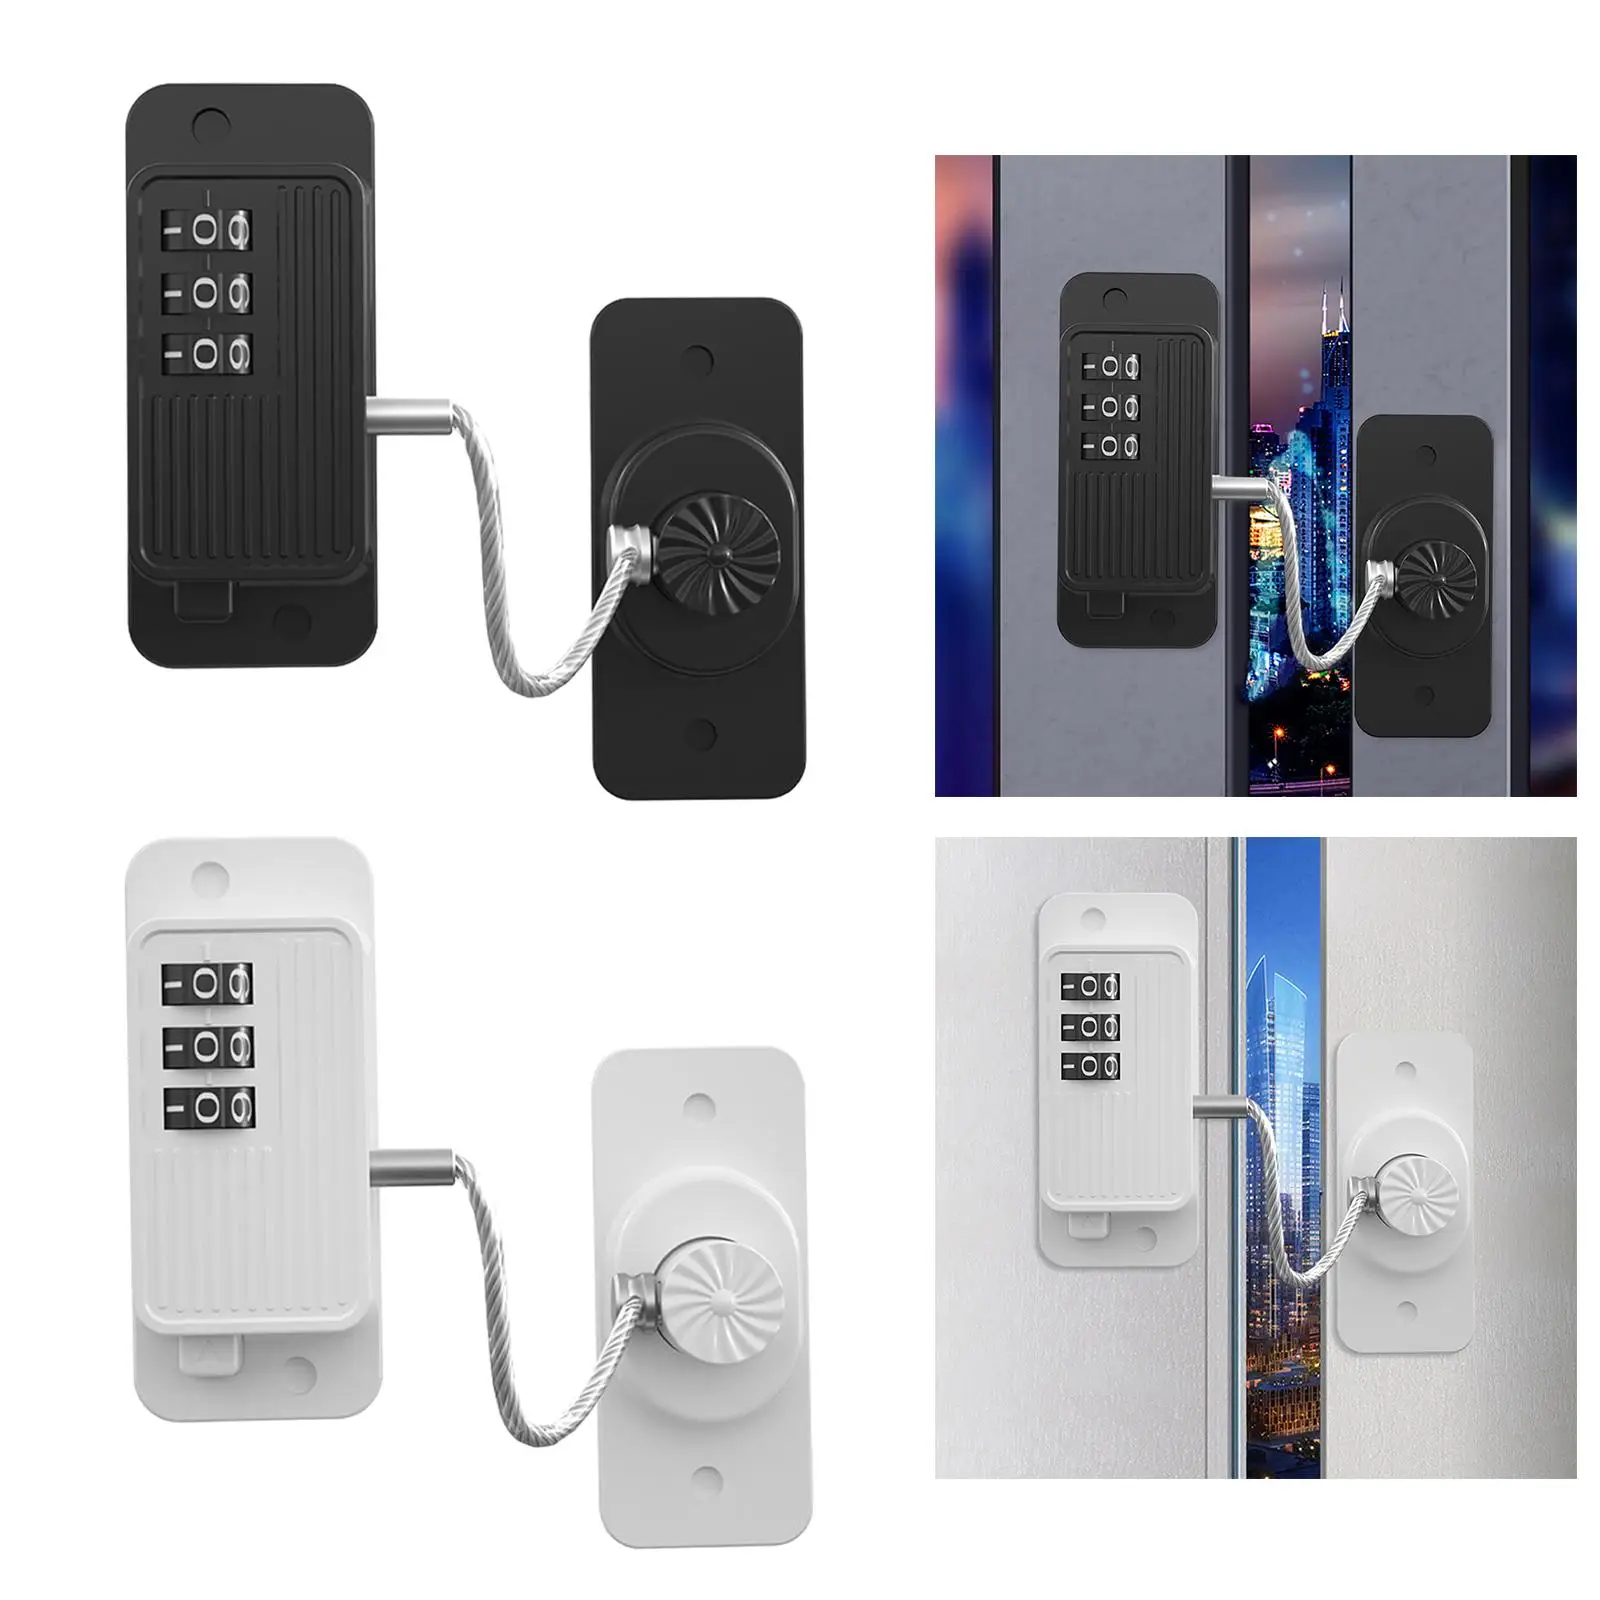 Cabinet Password Lock Refrigerator Lock Latch Left or Right Installed 17.3cm Steel Cable for Closetswindows Doors Durable